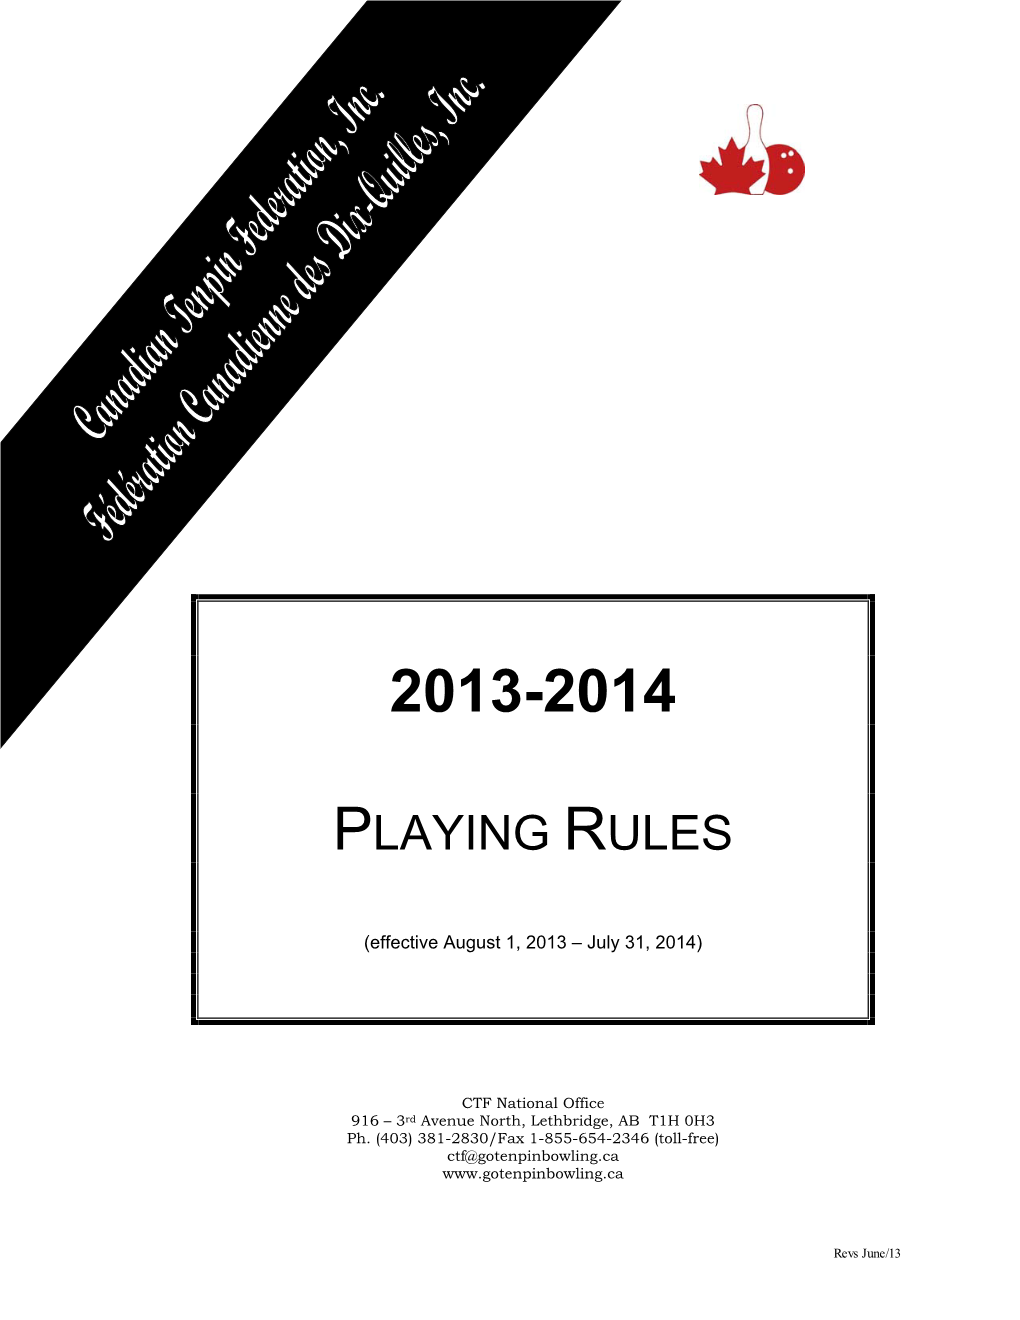 Playing Rules